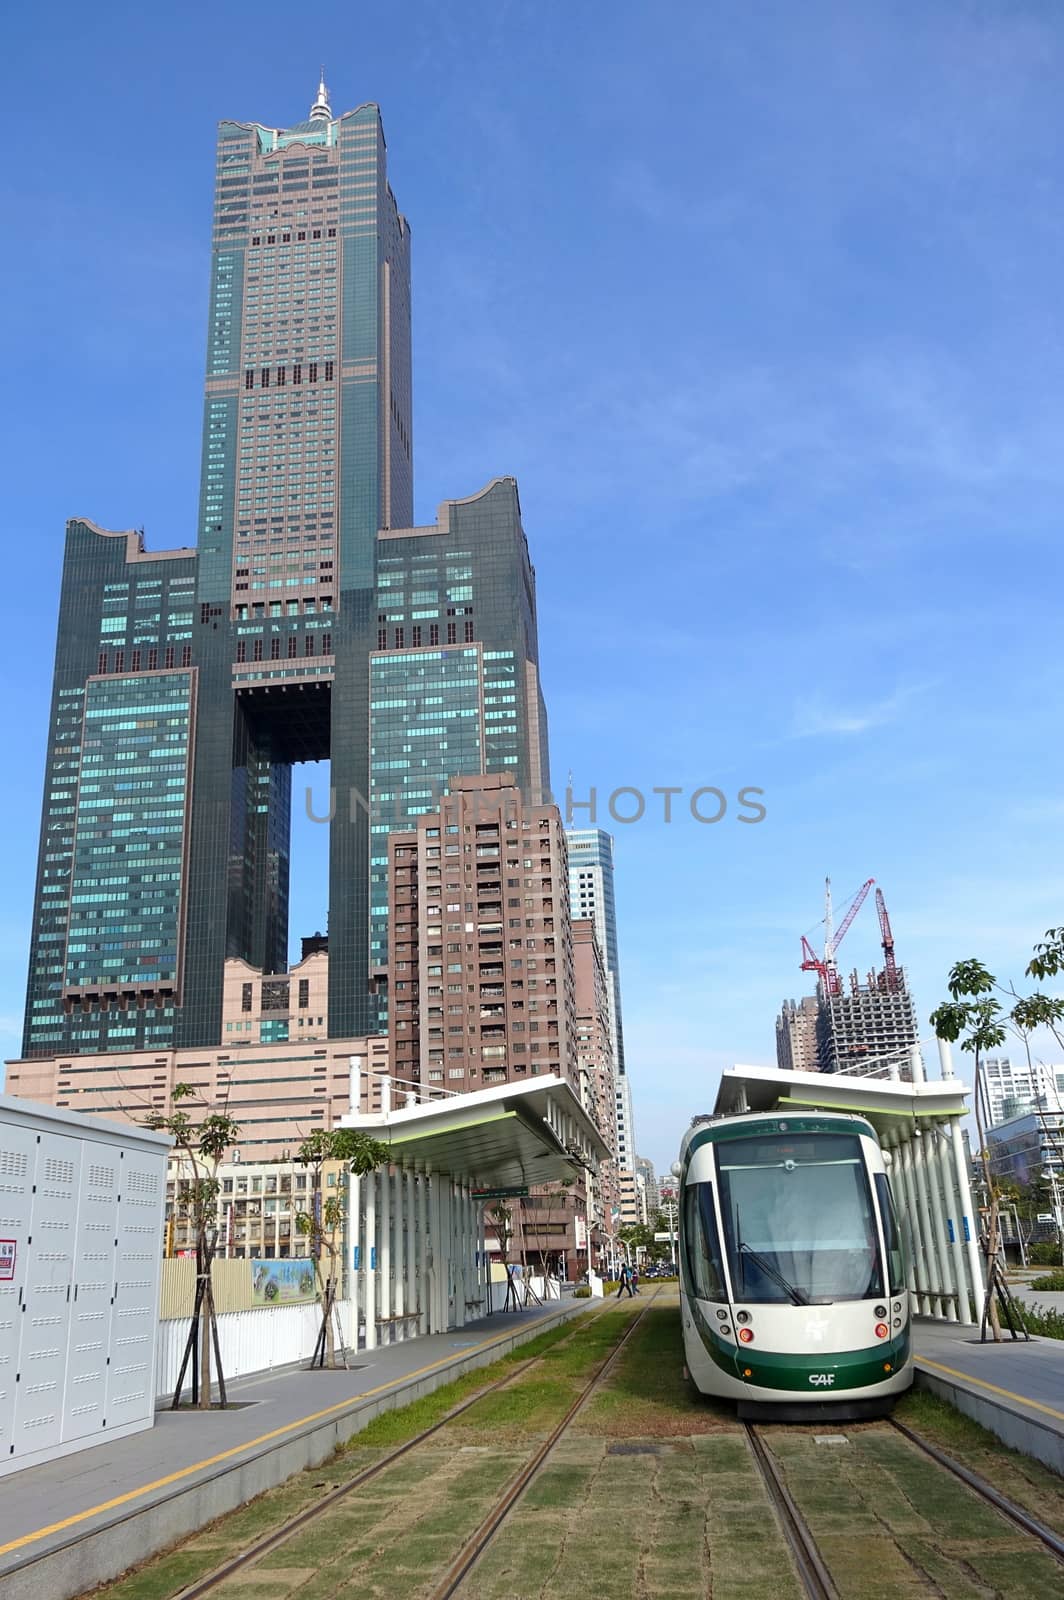 KAOHSIUNG, TAIWAN -- JANUARY 29, 2017: The new Kaohsiung light rail tram system, that has recently started partial operations. In the back is the 85 story Tuntex Tower Building.